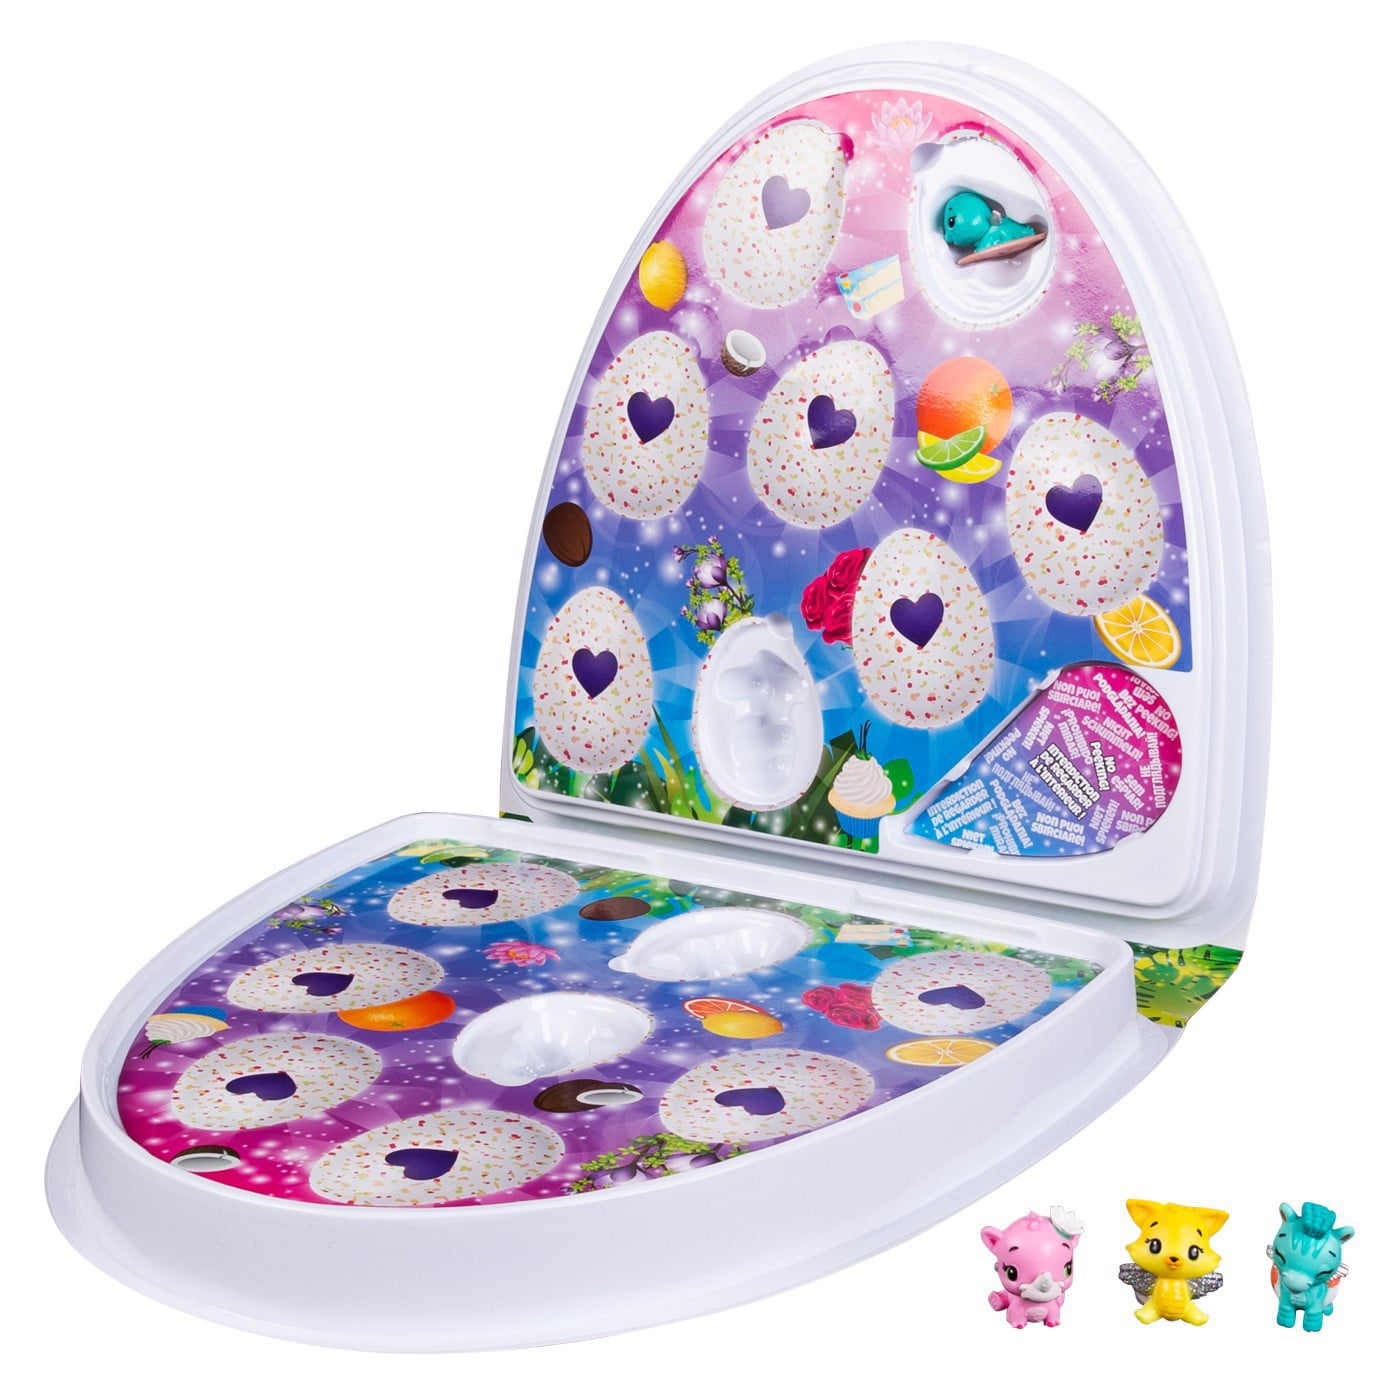 X1 Hatchimals Colleggtibles Sweet Smelling 6pk Only at Target for sale online 